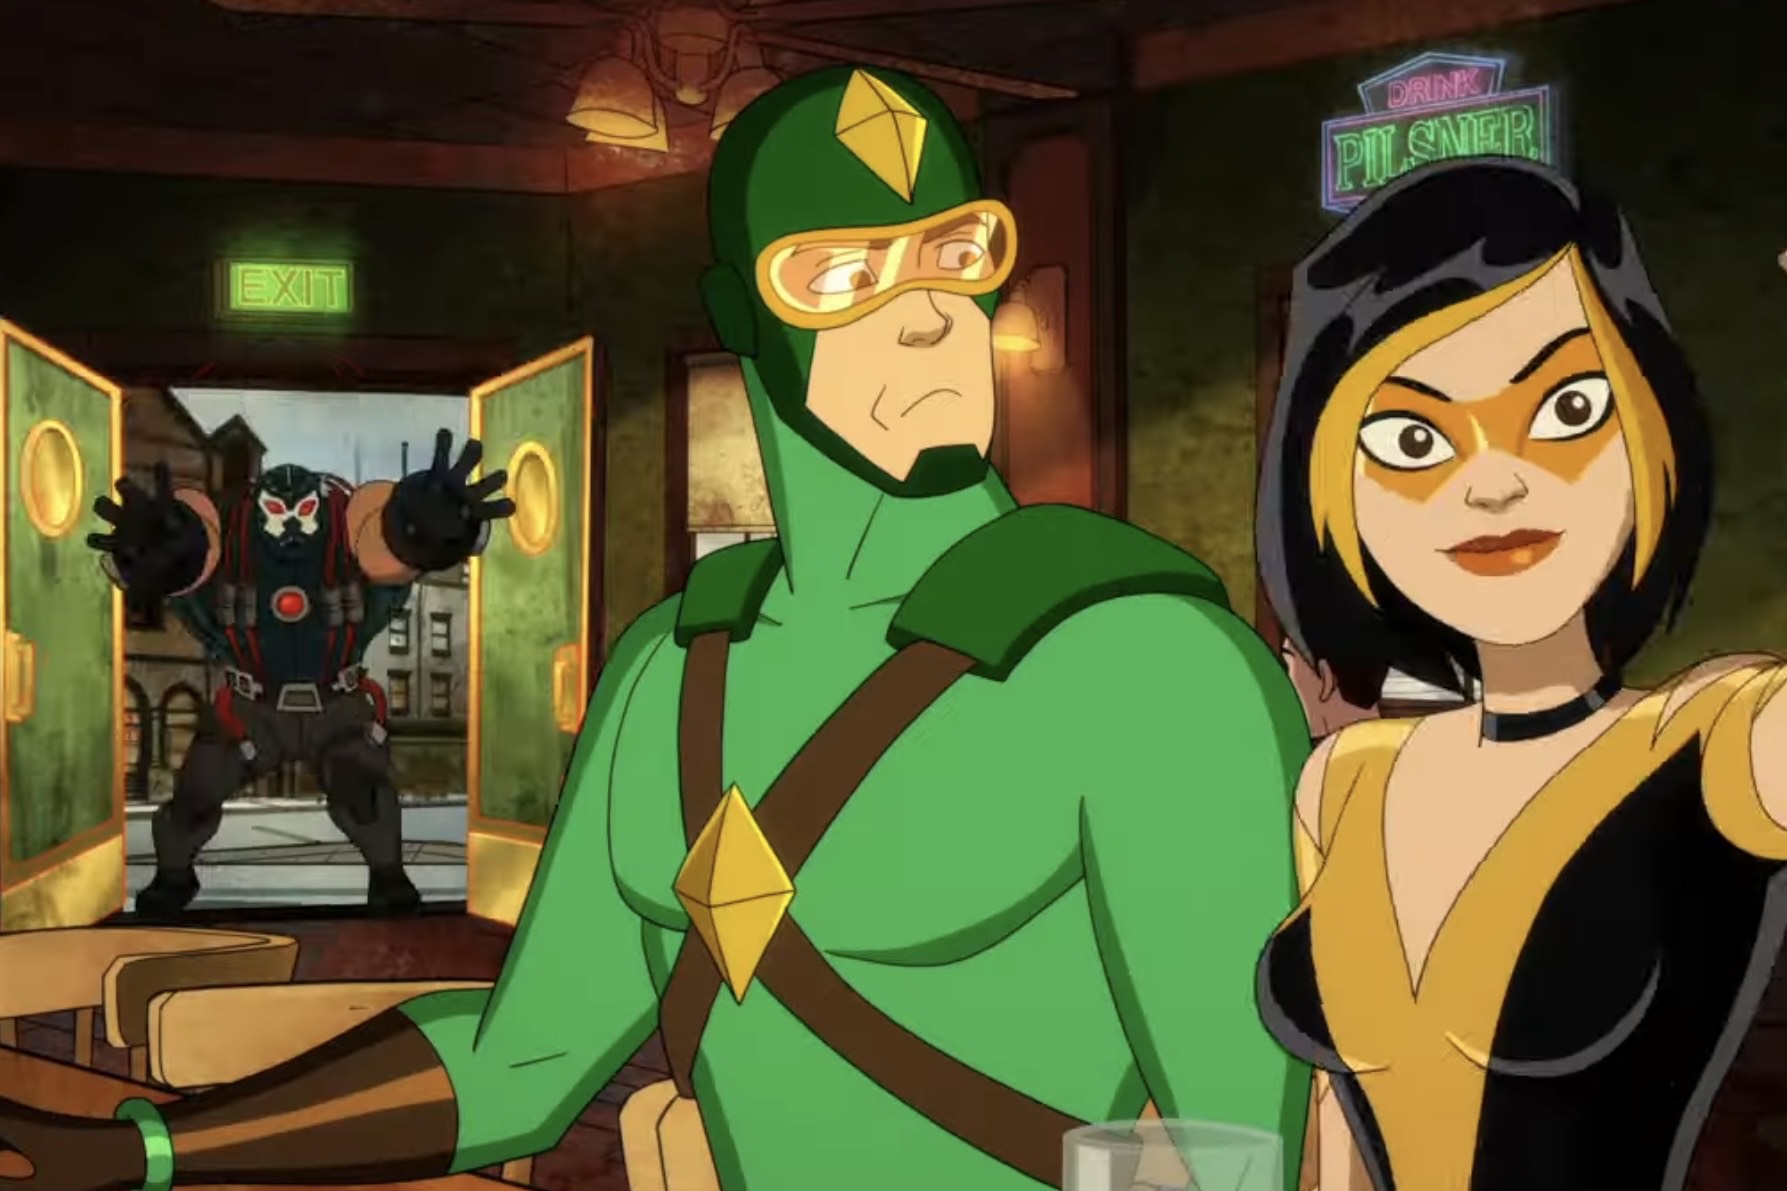 Viewers, prepare for a wild flight with Kite-Man, the most surprising DC protagonist yet, in an all-new animated series.